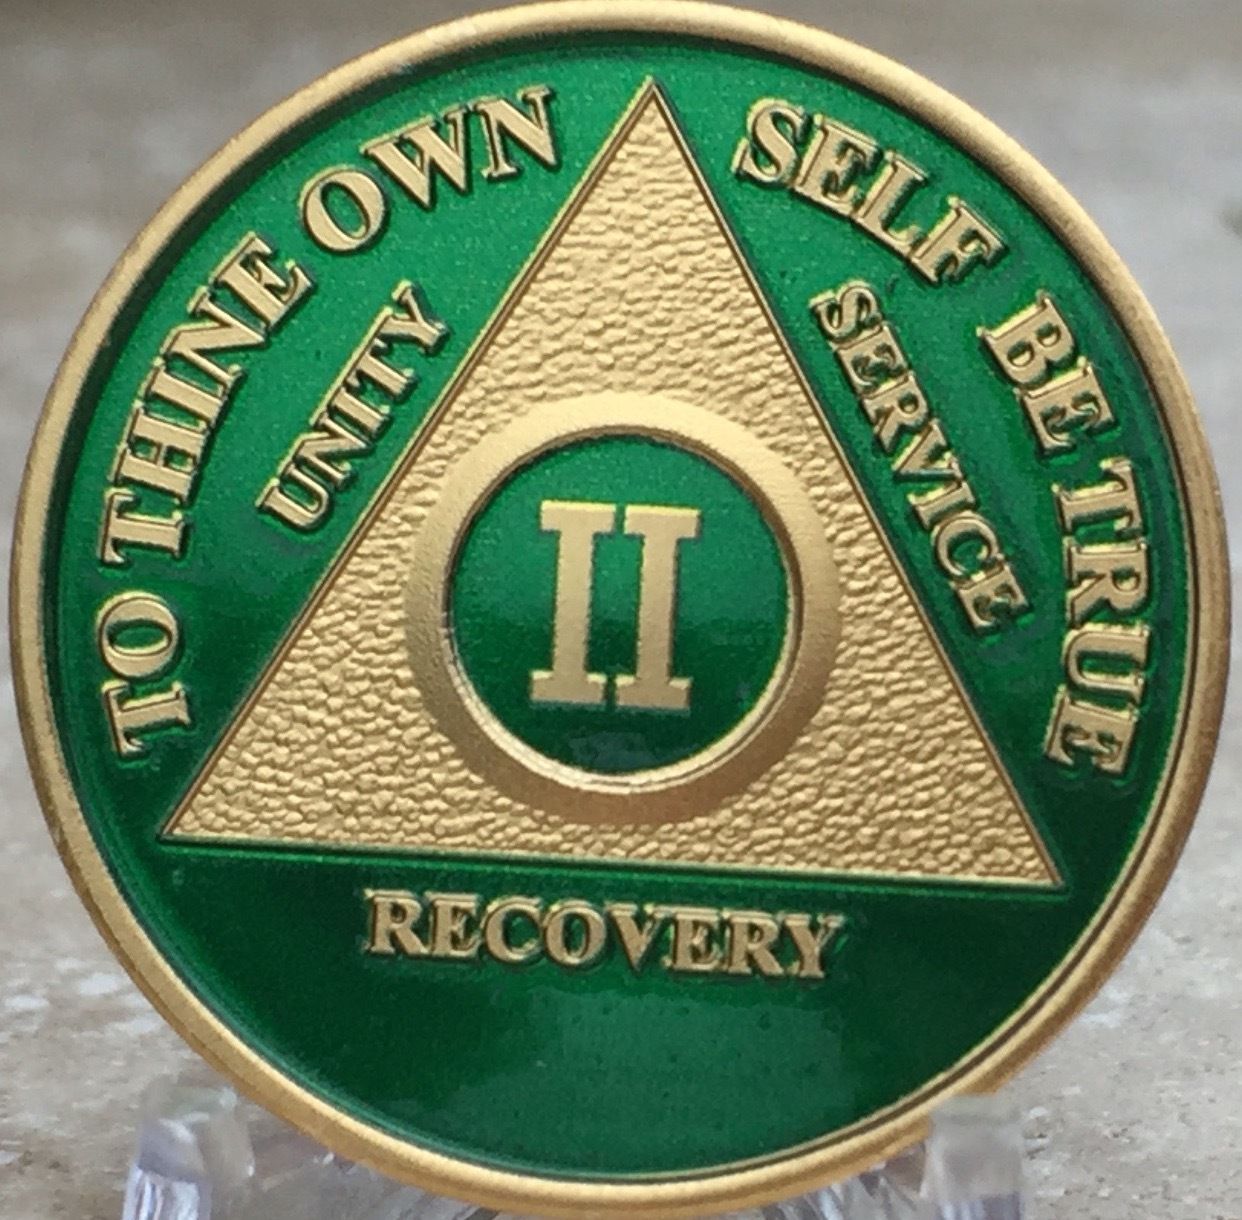 2 Year AA Medallion Green Gold Plated Alcoholics Anonymous Sobriety Chip Coin II